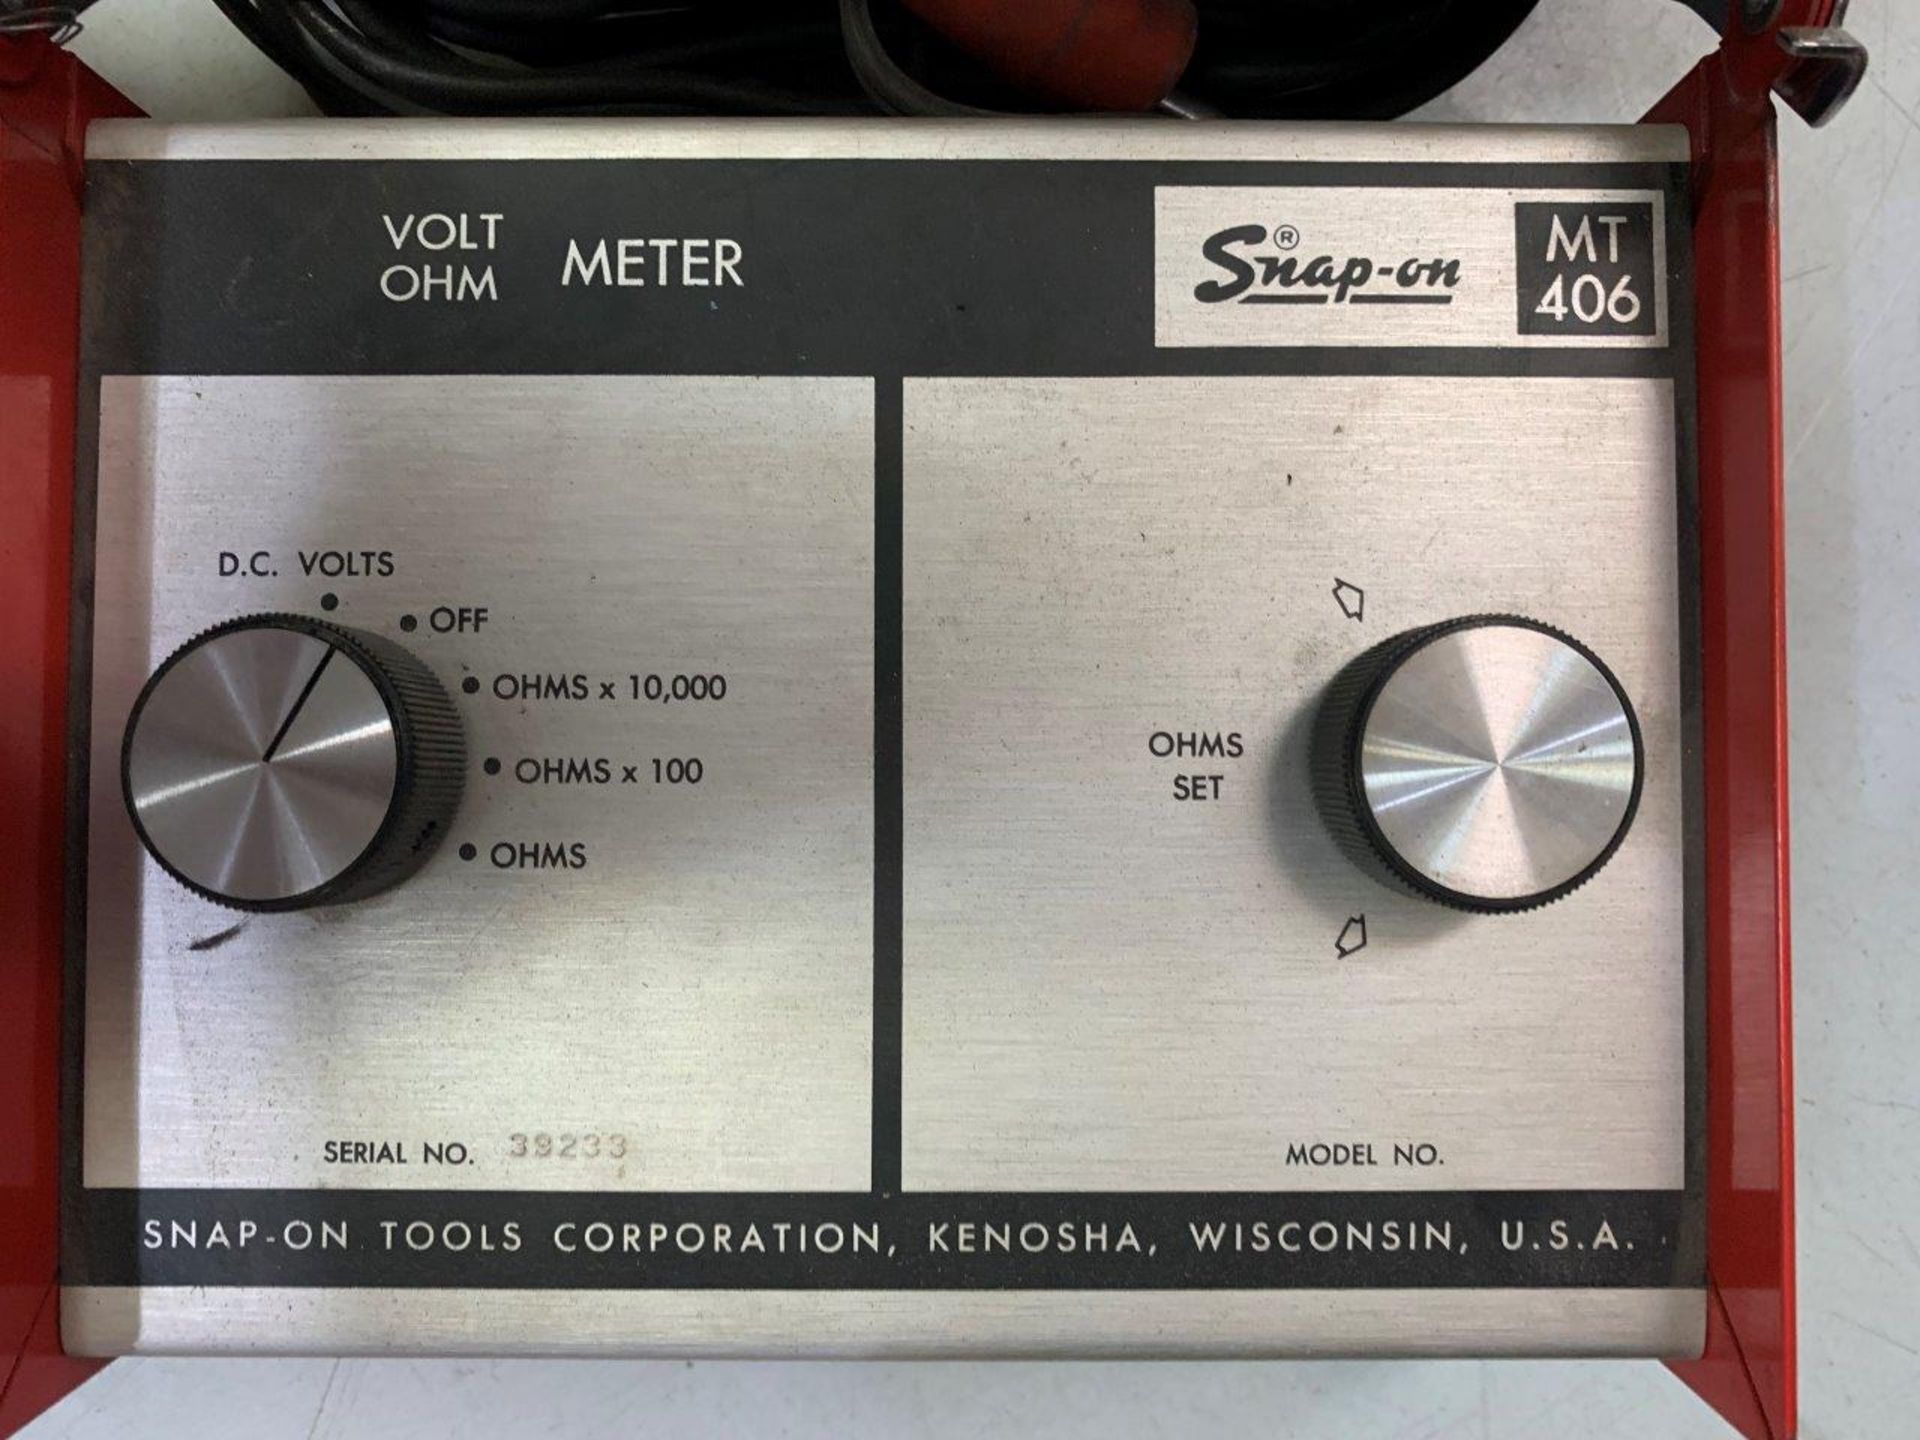 SNAP-ON MT 406 VOLT/OHM METER - Image 3 of 4